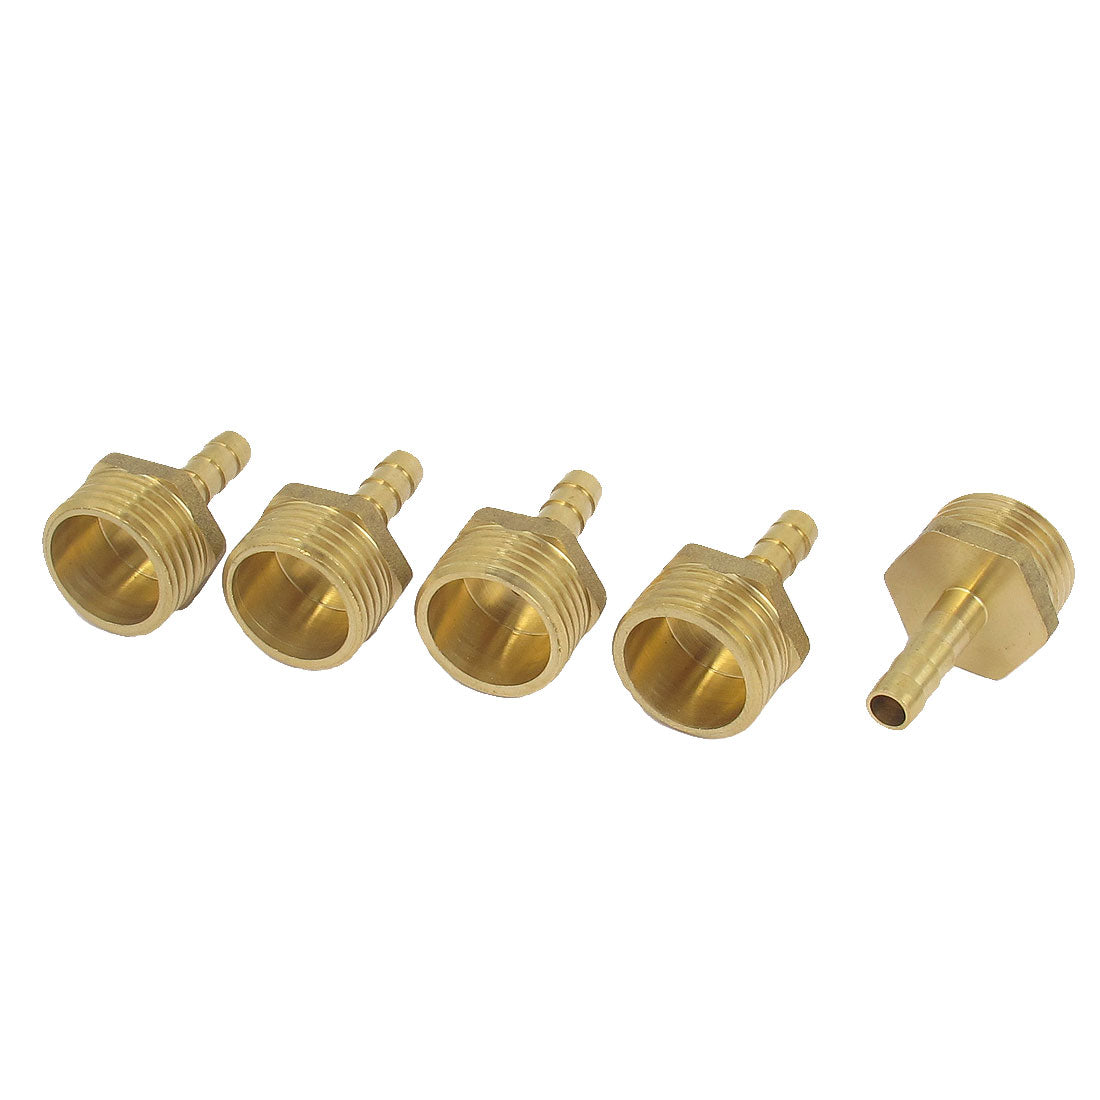 uxcell Uxcell Brass 1/2BSP Male Thread to 6mm Hose Barb Straight Fitting Adapter Coupler 5PCS